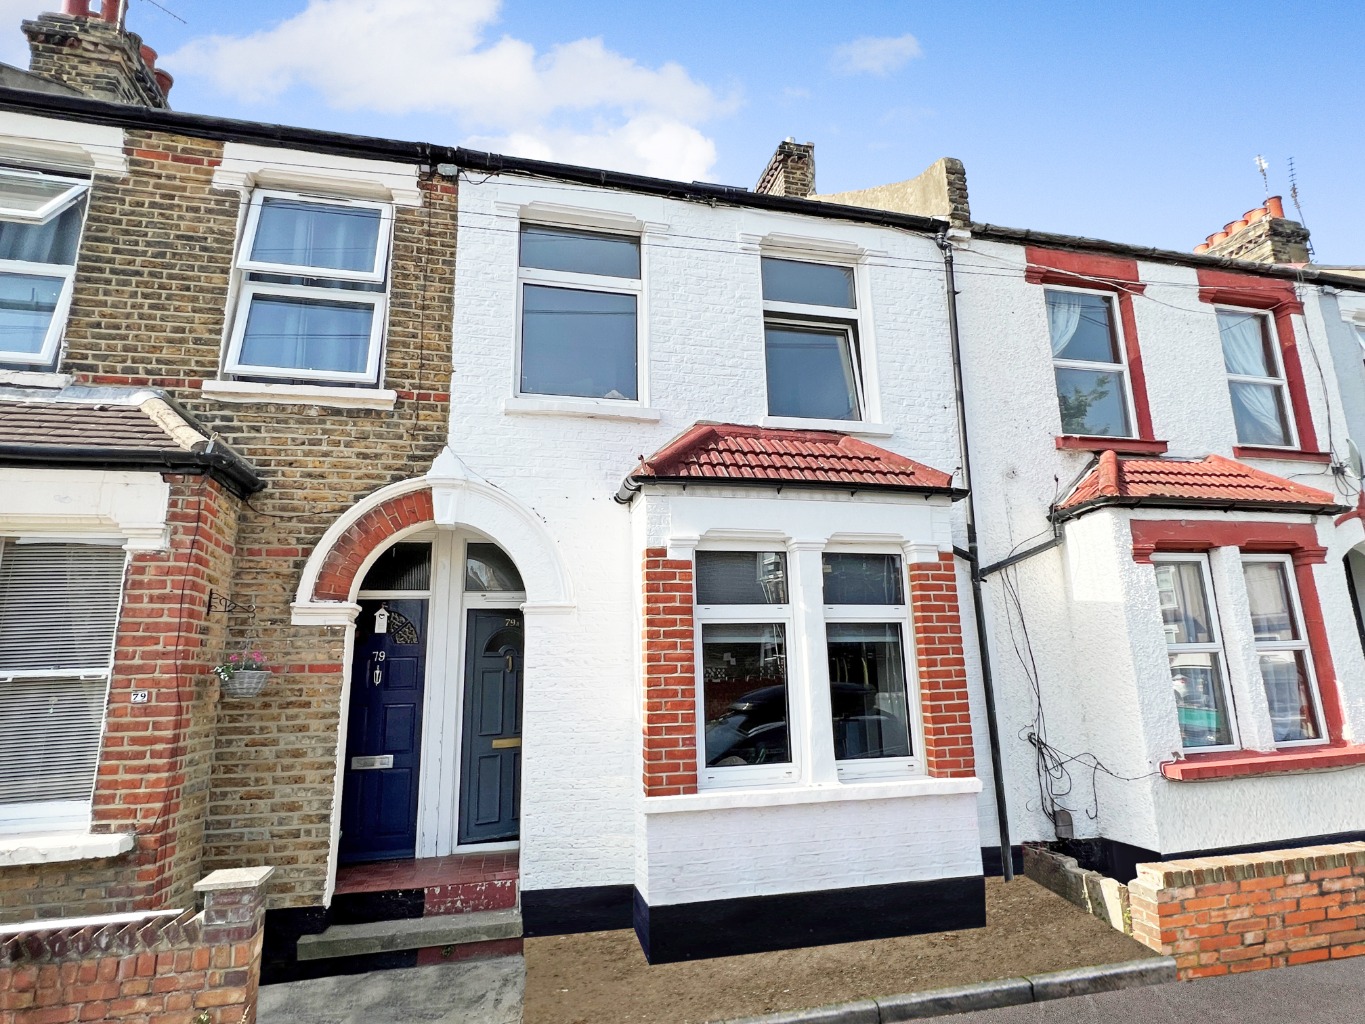 Beaumont Gibbs are delighted to offer this modern and spacious four bedroomed and two bathroom Victorian terrace house to let. The house is situated approximately half a mile distance from Plumstead mainline station and a mile to Woolwich Arsenal Crossrail, DLR and mainline station.